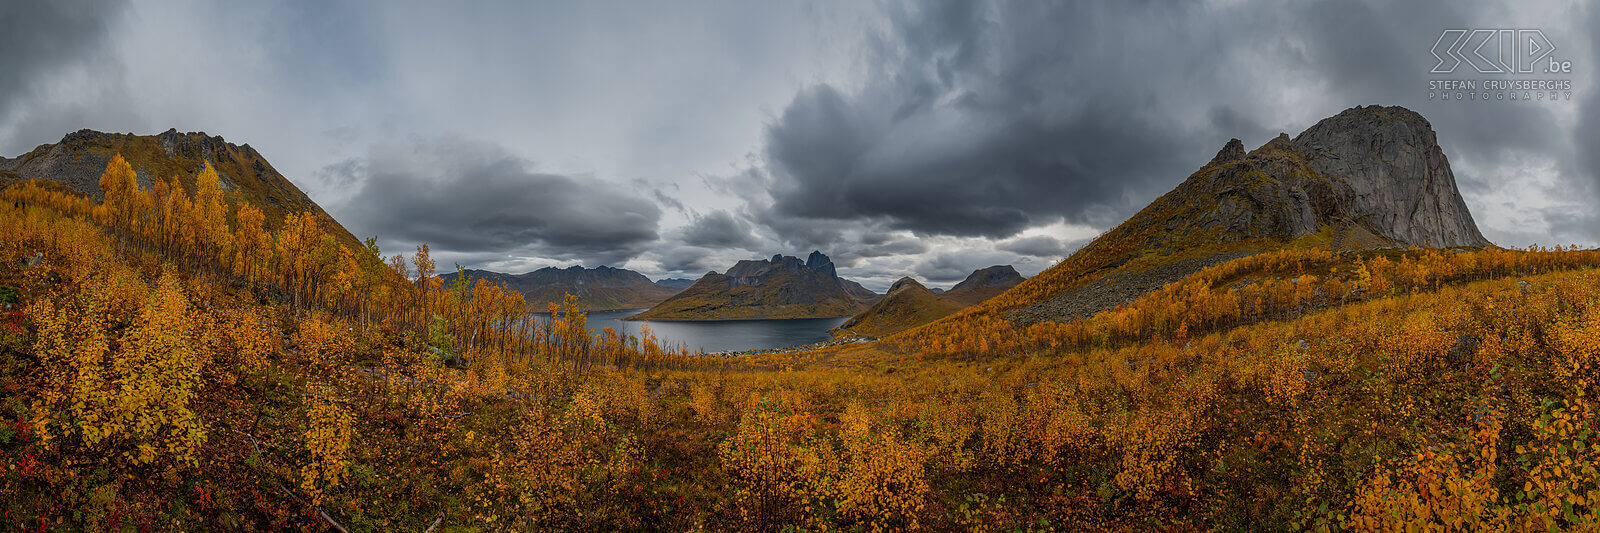 Senja - Fjordgard - Hesten trail Panorama image with beautiful autumn colors from the start of the ascent of the Hesten, a mountain that offers a fantastic view of the surrounding fjords and the famous rock peak of the Segla. The trail starts from the village of Fjordgard Stefan Cruysberghs